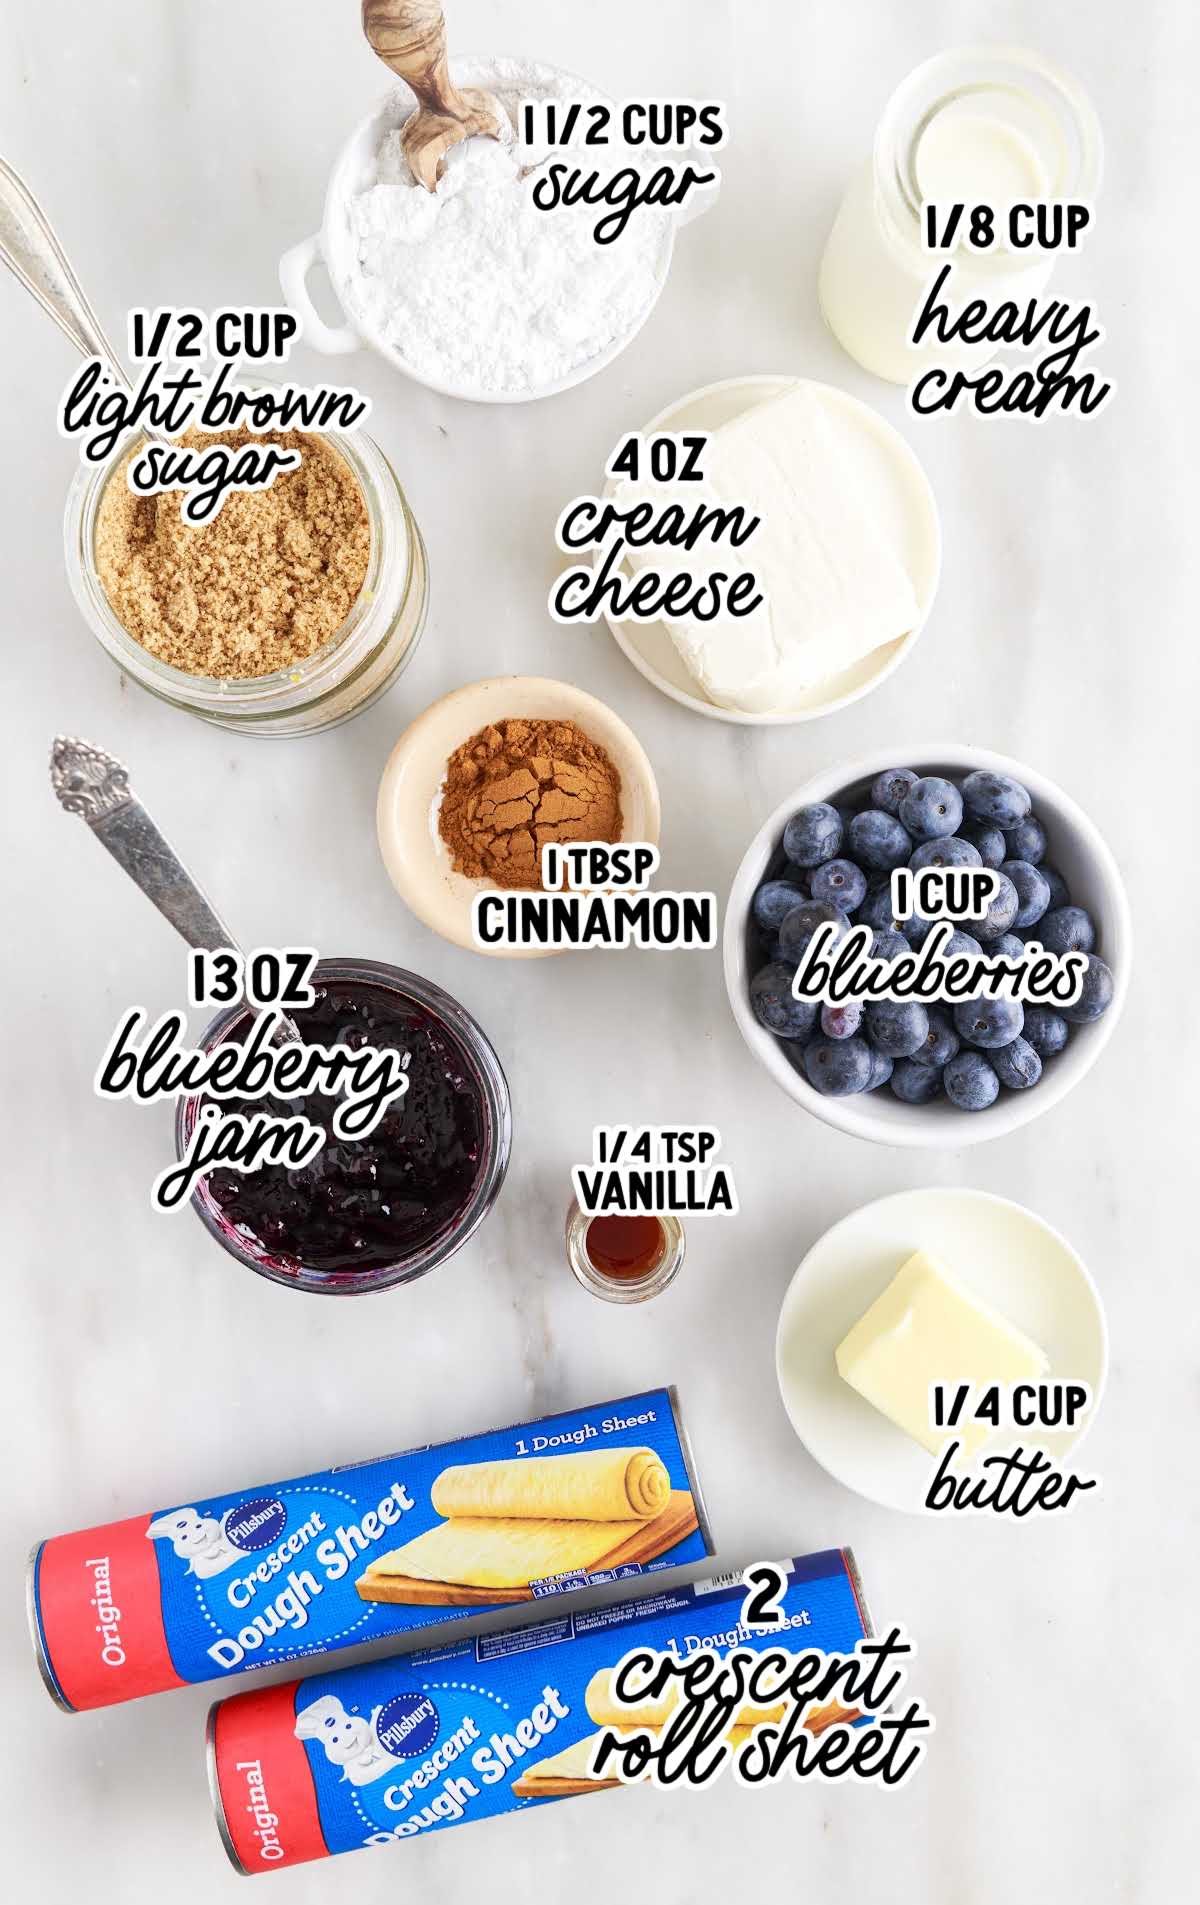 Blueberry Cinnamon Rolls raw ingredients that are labeled